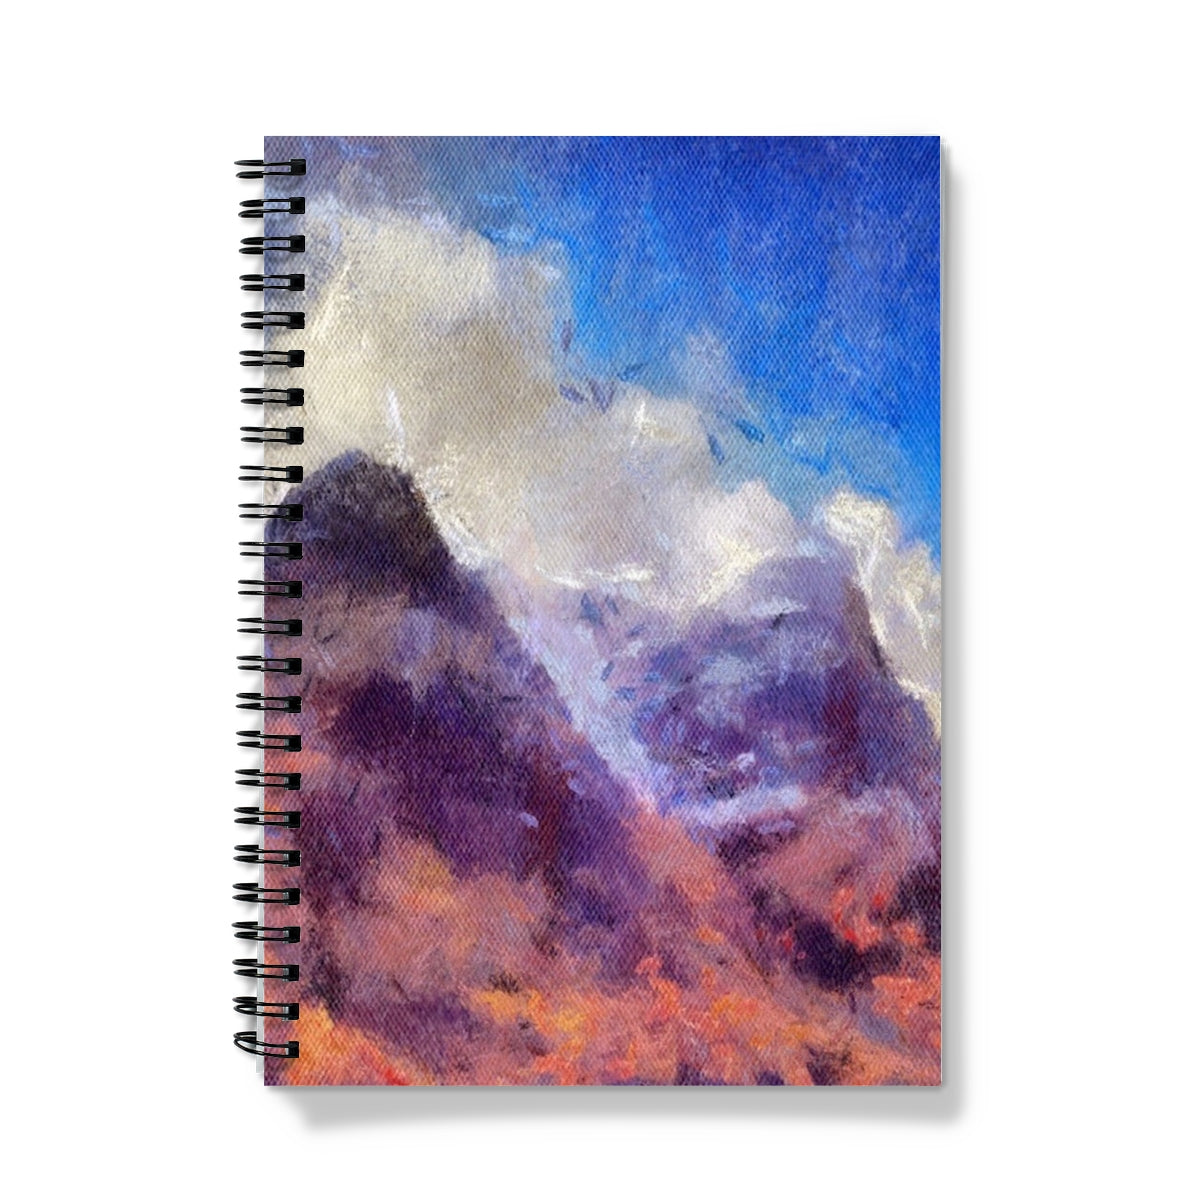 Glencoe Art Gifts Notebook-Journals & Notebooks-Glencoe Art Gallery-A4-Lined-Paintings, Prints, Homeware, Art Gifts From Scotland By Scottish Artist Kevin Hunter